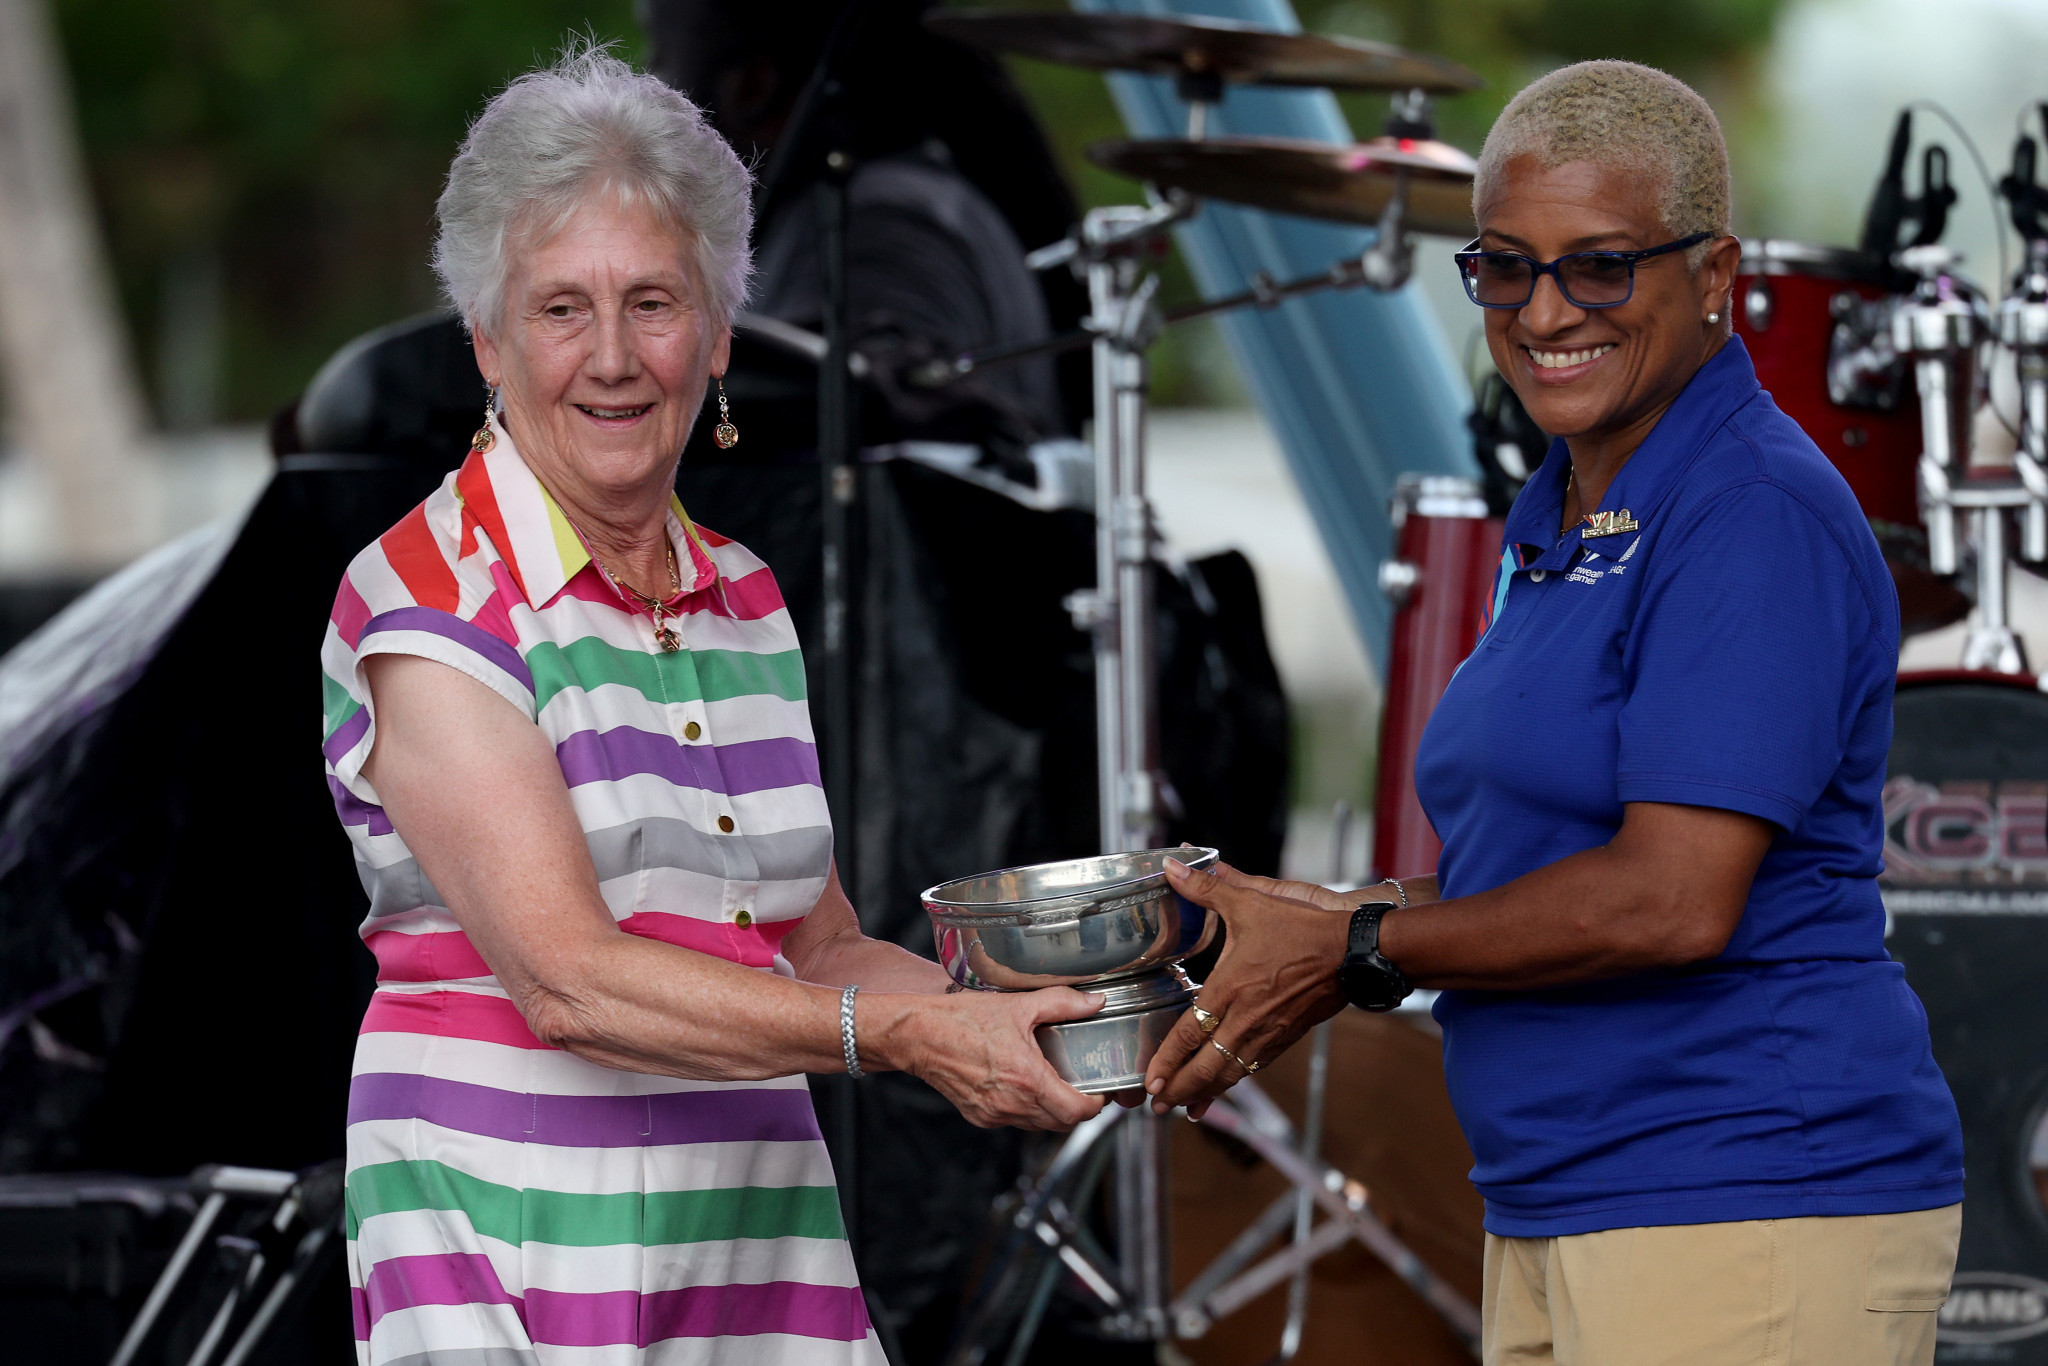 Trinidad and Tobago Olympic Committee President Diane Henderson, right, joined CGF President Dame Louise Martin, left, on the stage at the Closing Ceremony ©Getty Images